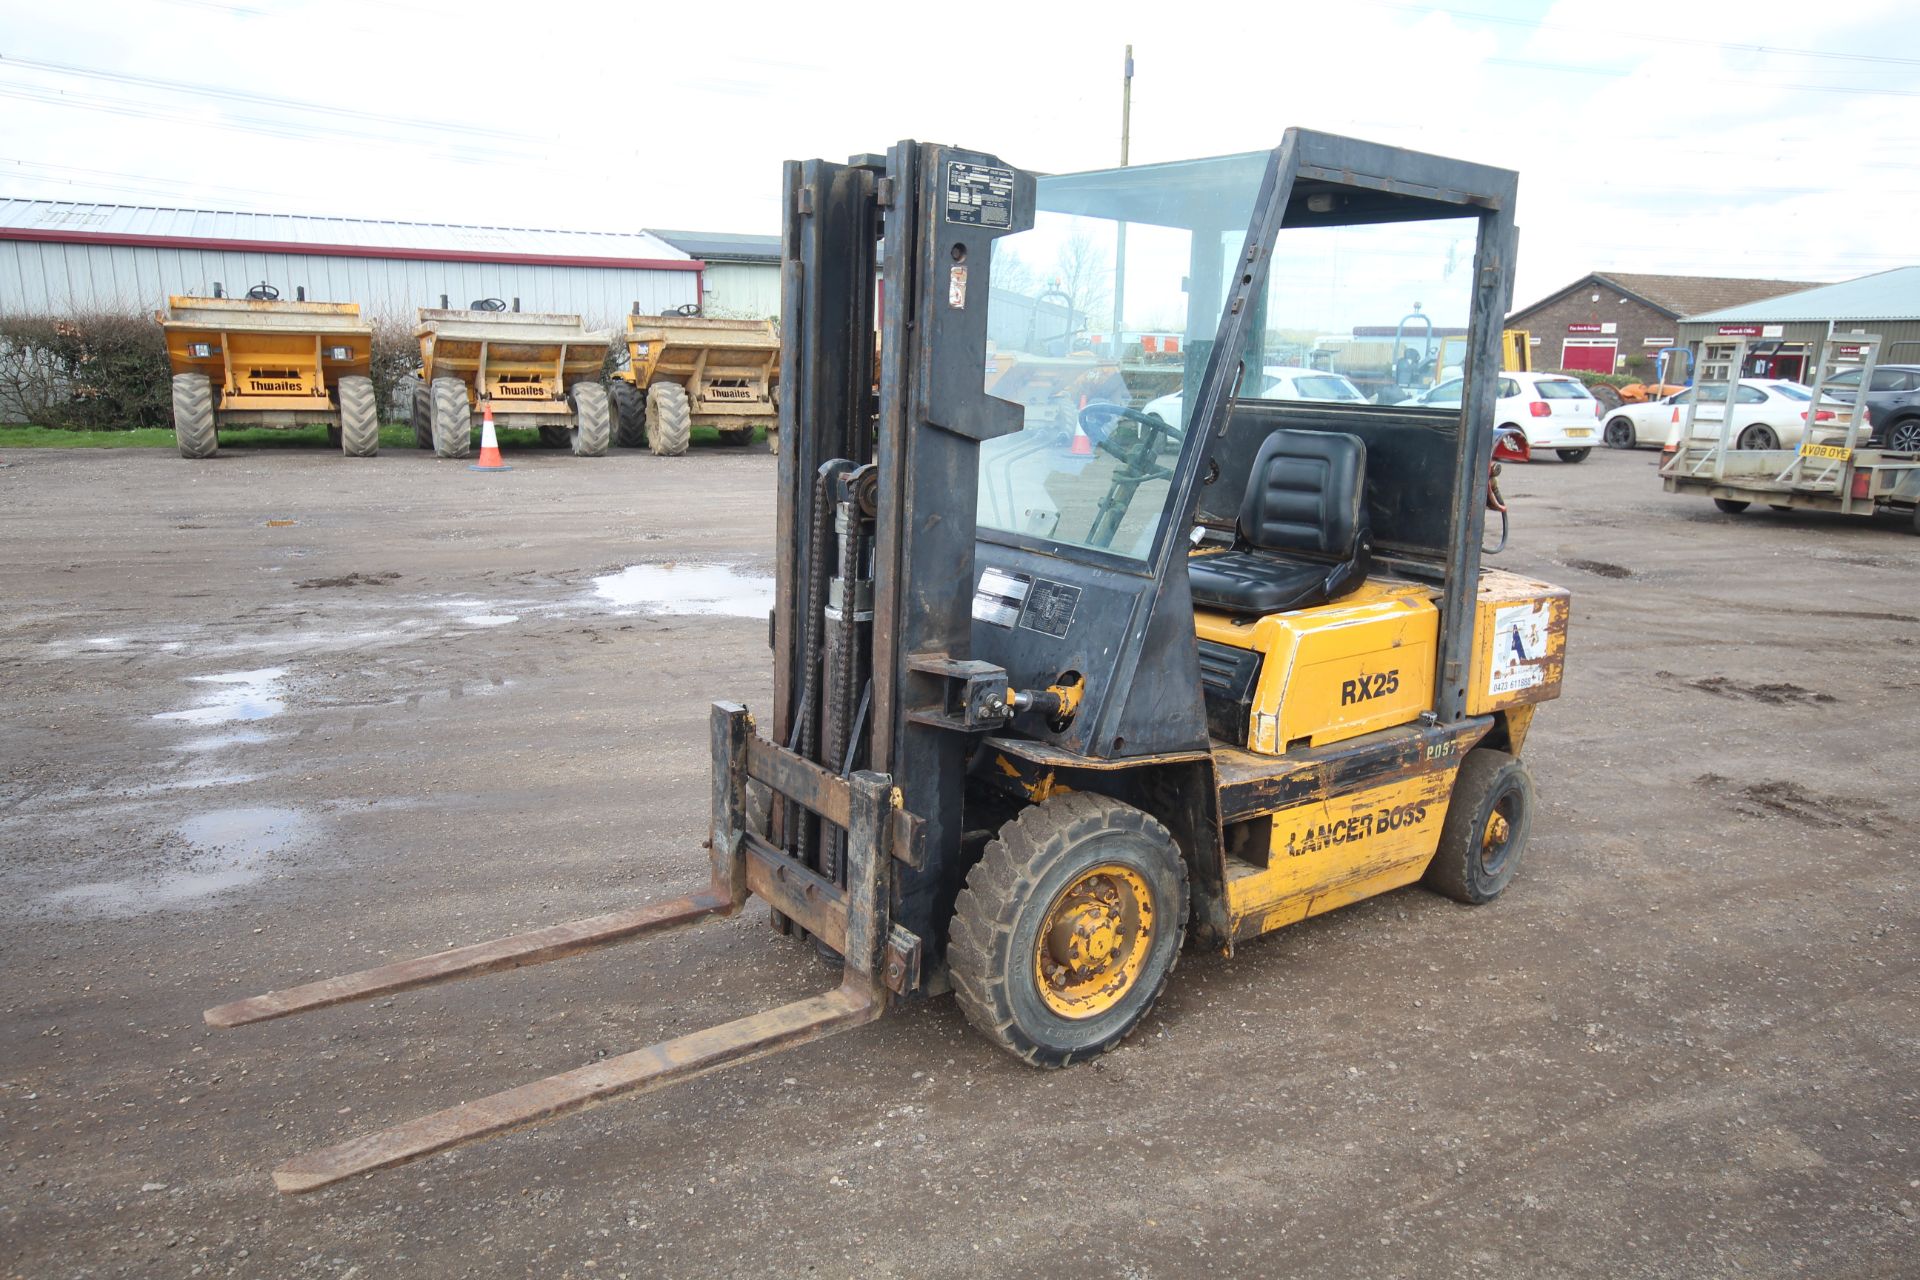 Lancer Boss RX25L 2.5T gas yard forklift. 7,027 hours. With Nissan engine and triplex mast. Key